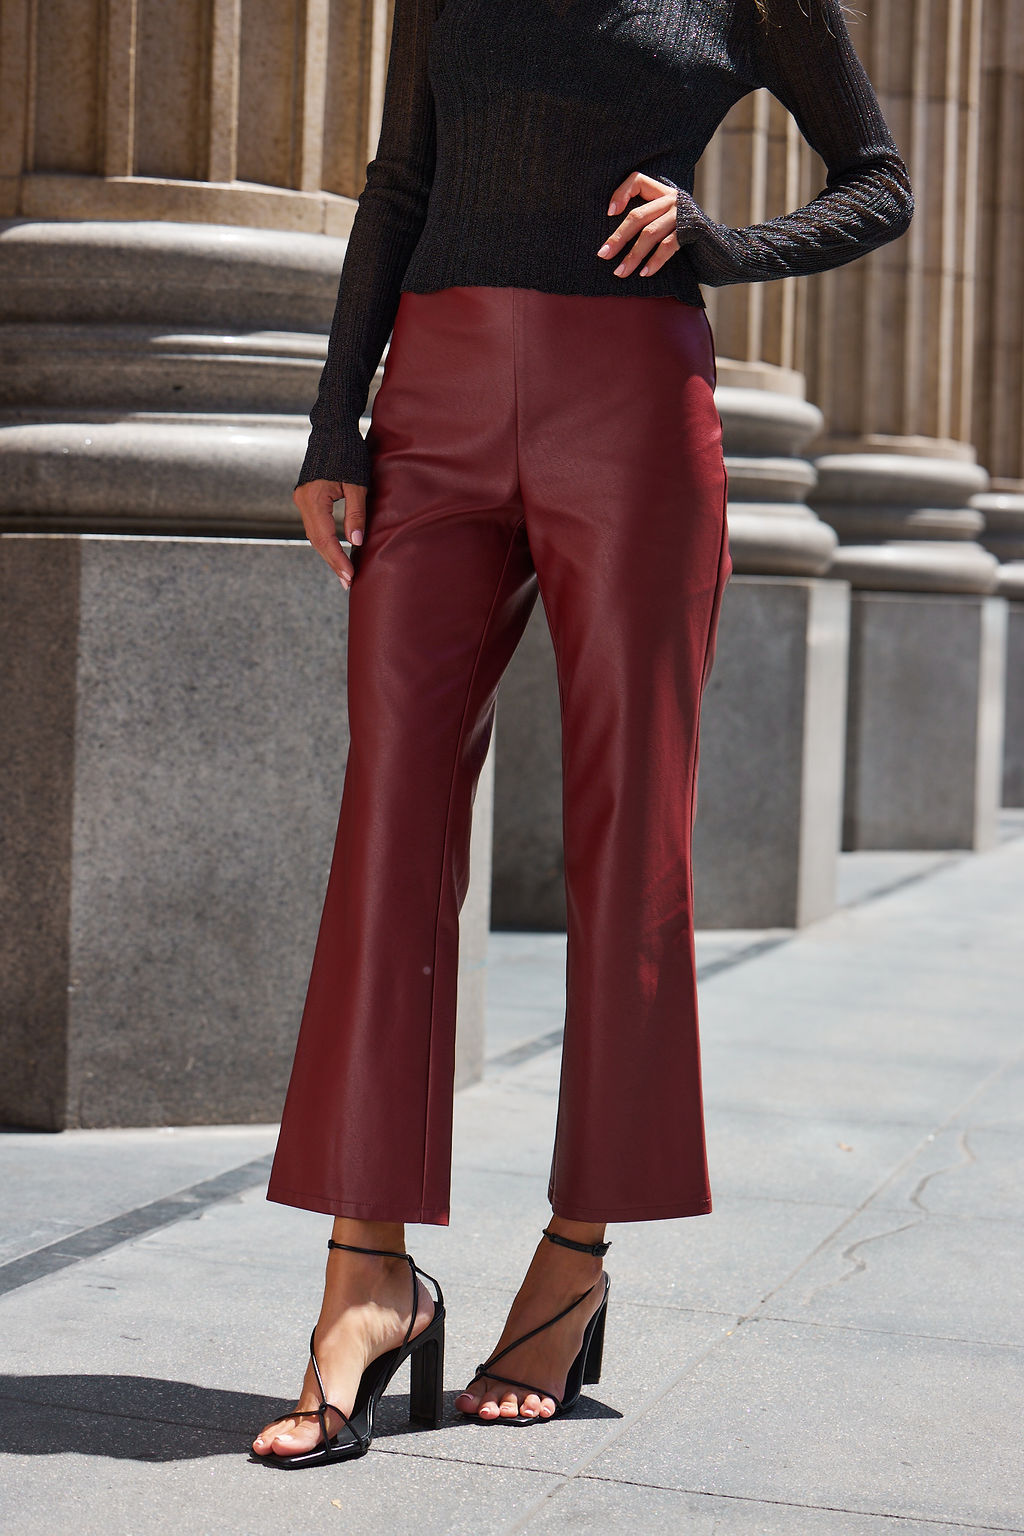 What To Wear With Burgundy Pants - Petite Dressing | Burgundy leggings  outfit, Burgundy pants, Burgundy jeans outfit